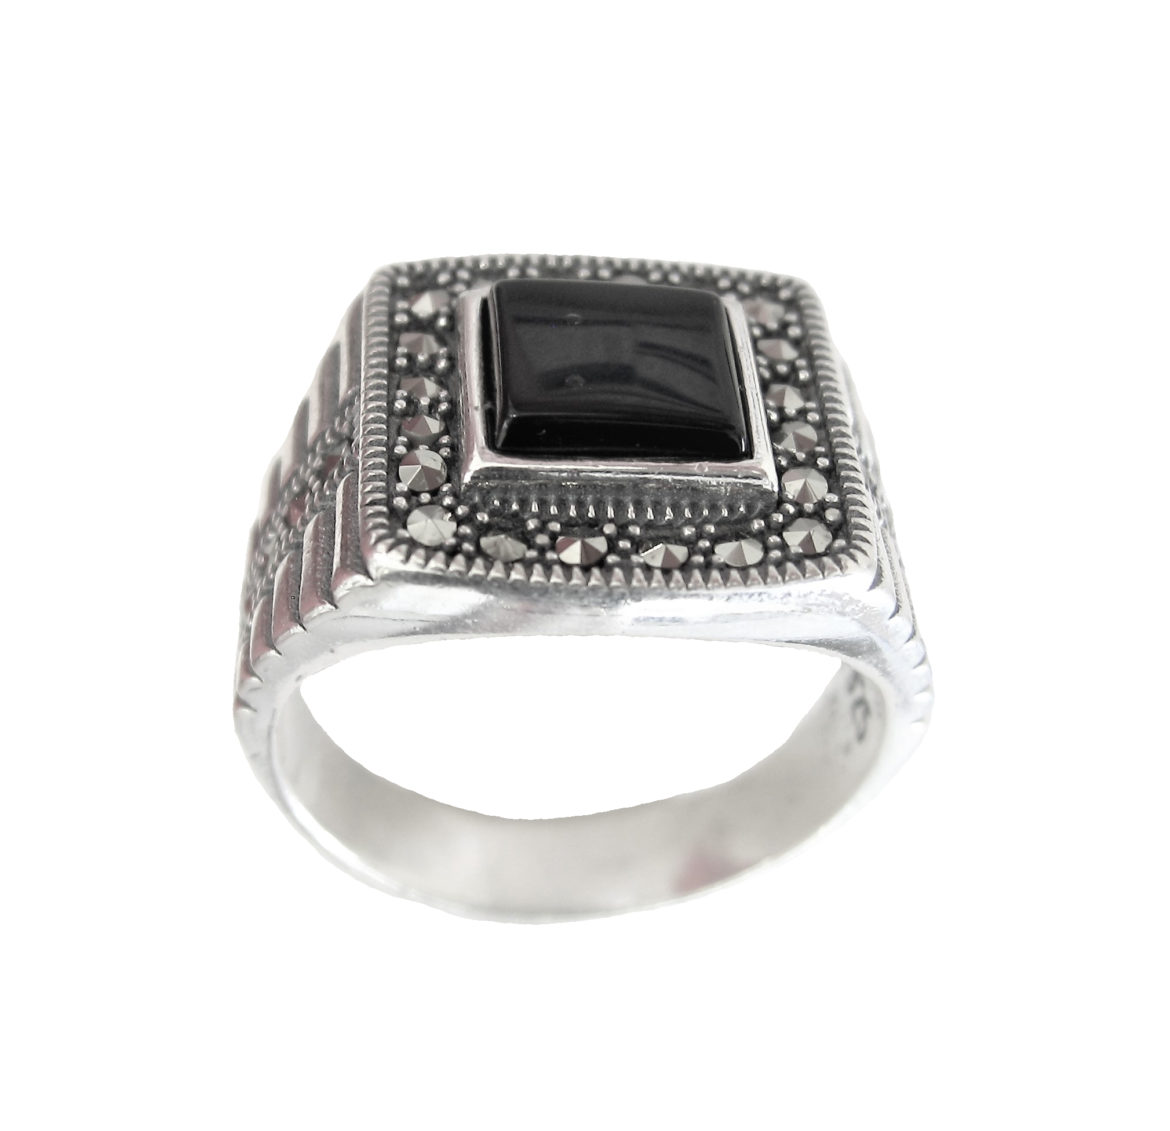 Titanium Ring with Silver Inlay Square Band any Sizing from 3-22 Moder –  Stonebrook Jewelry